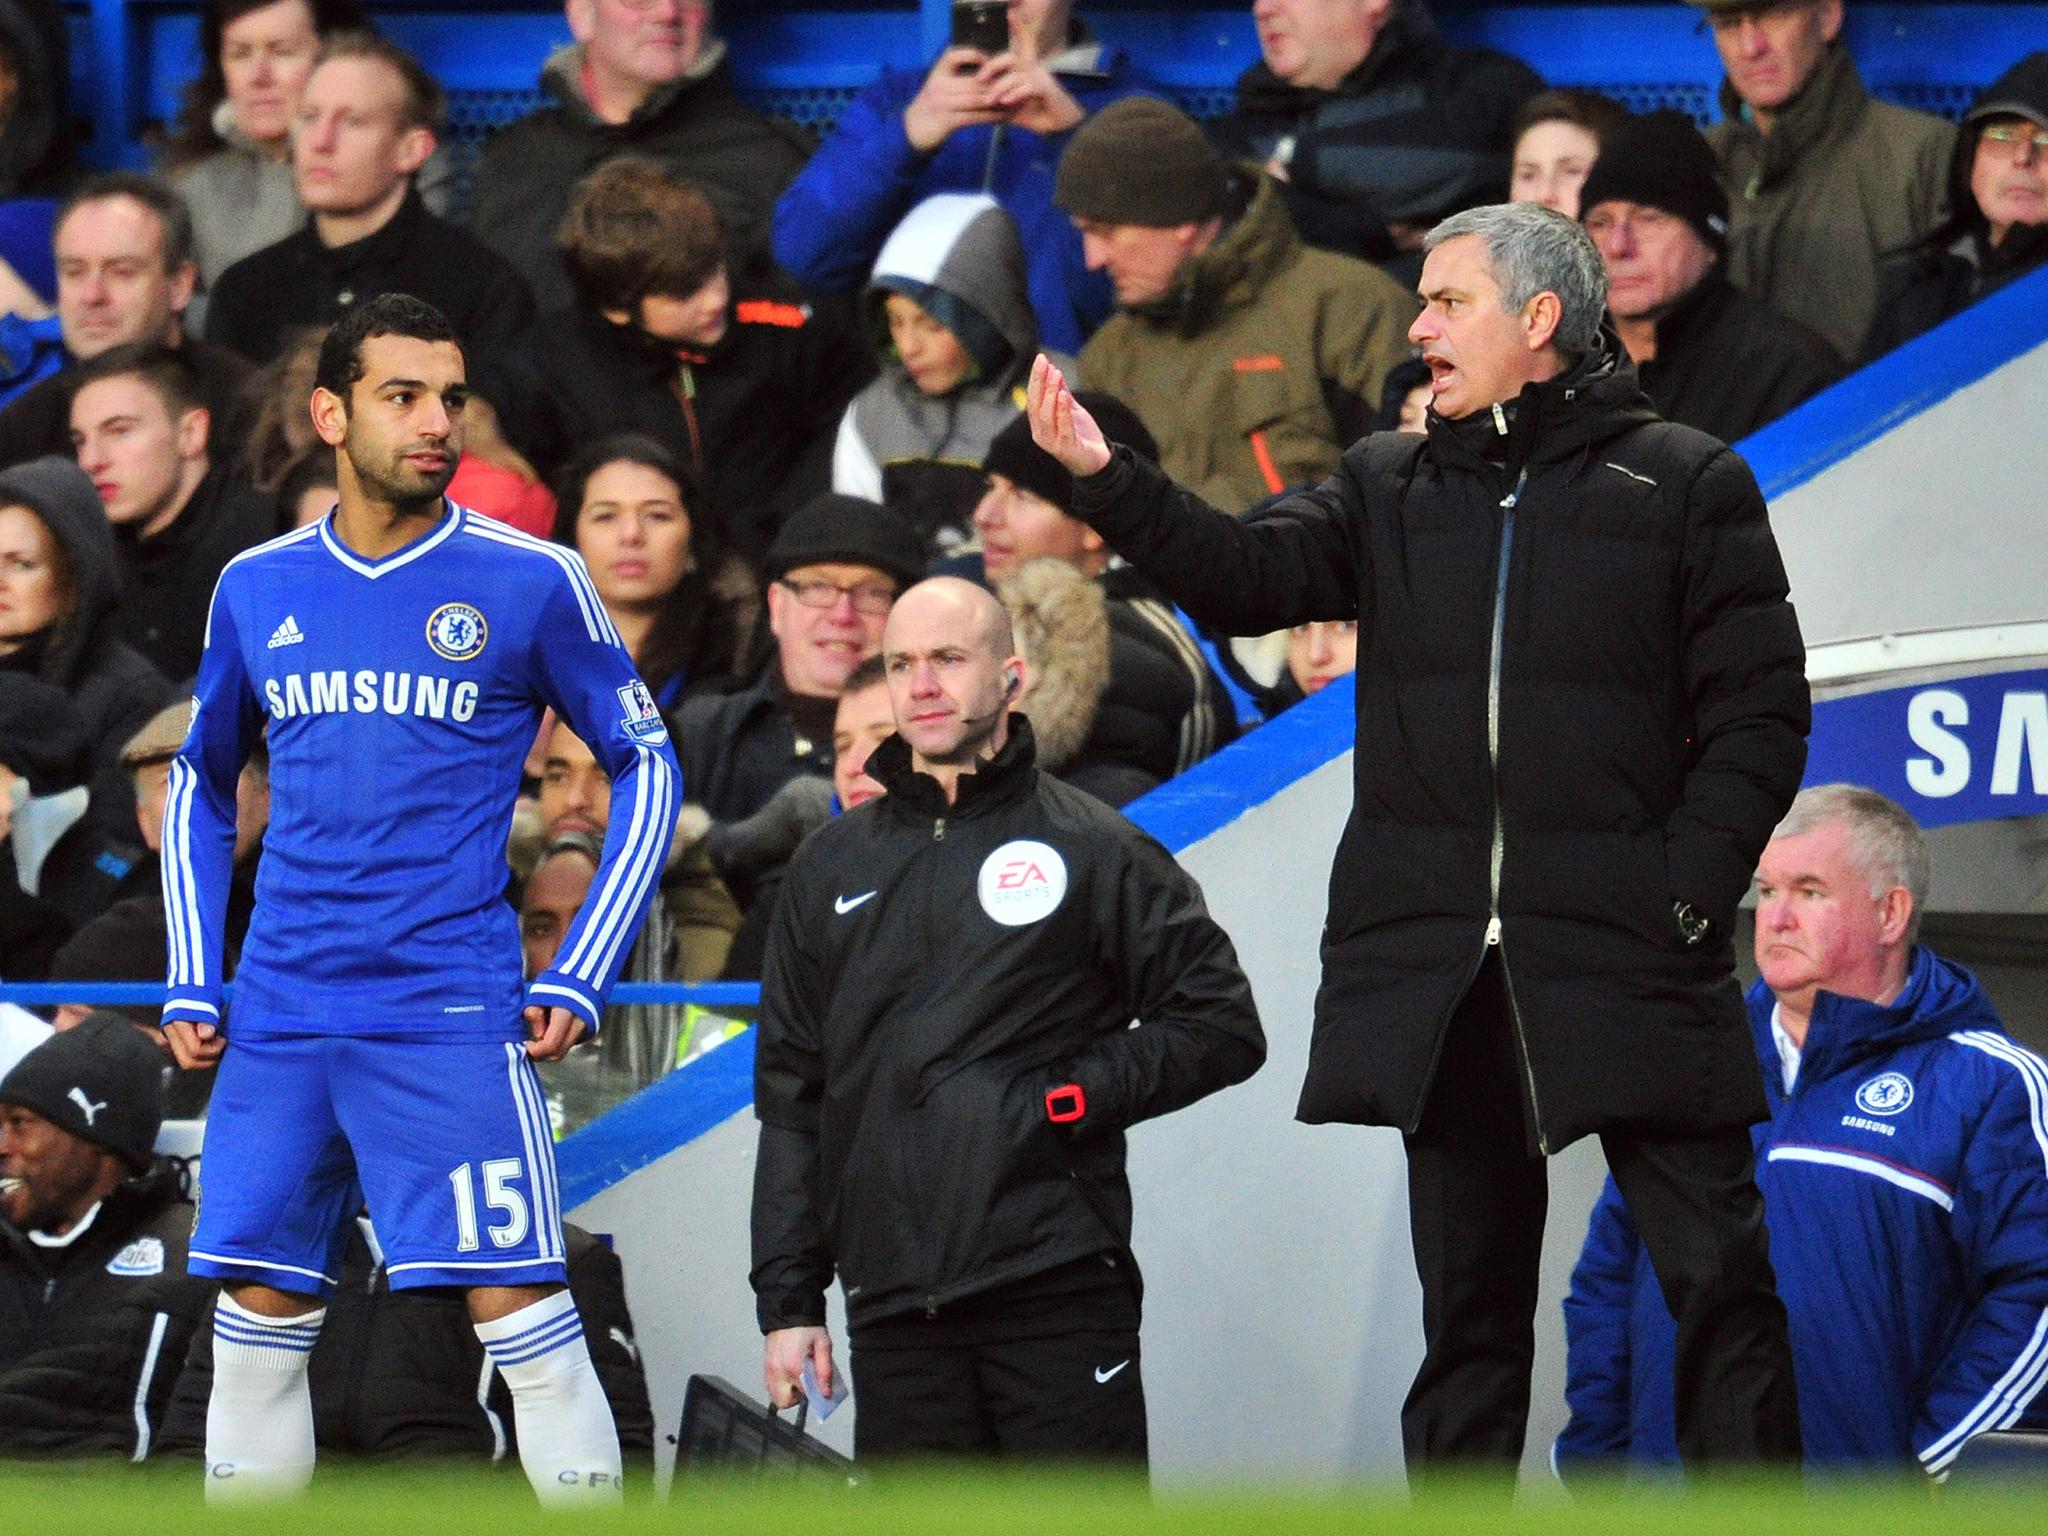 Jose Mourinho claimed Chelsea made the decision to sell Mohamed Salah to Roma, not him